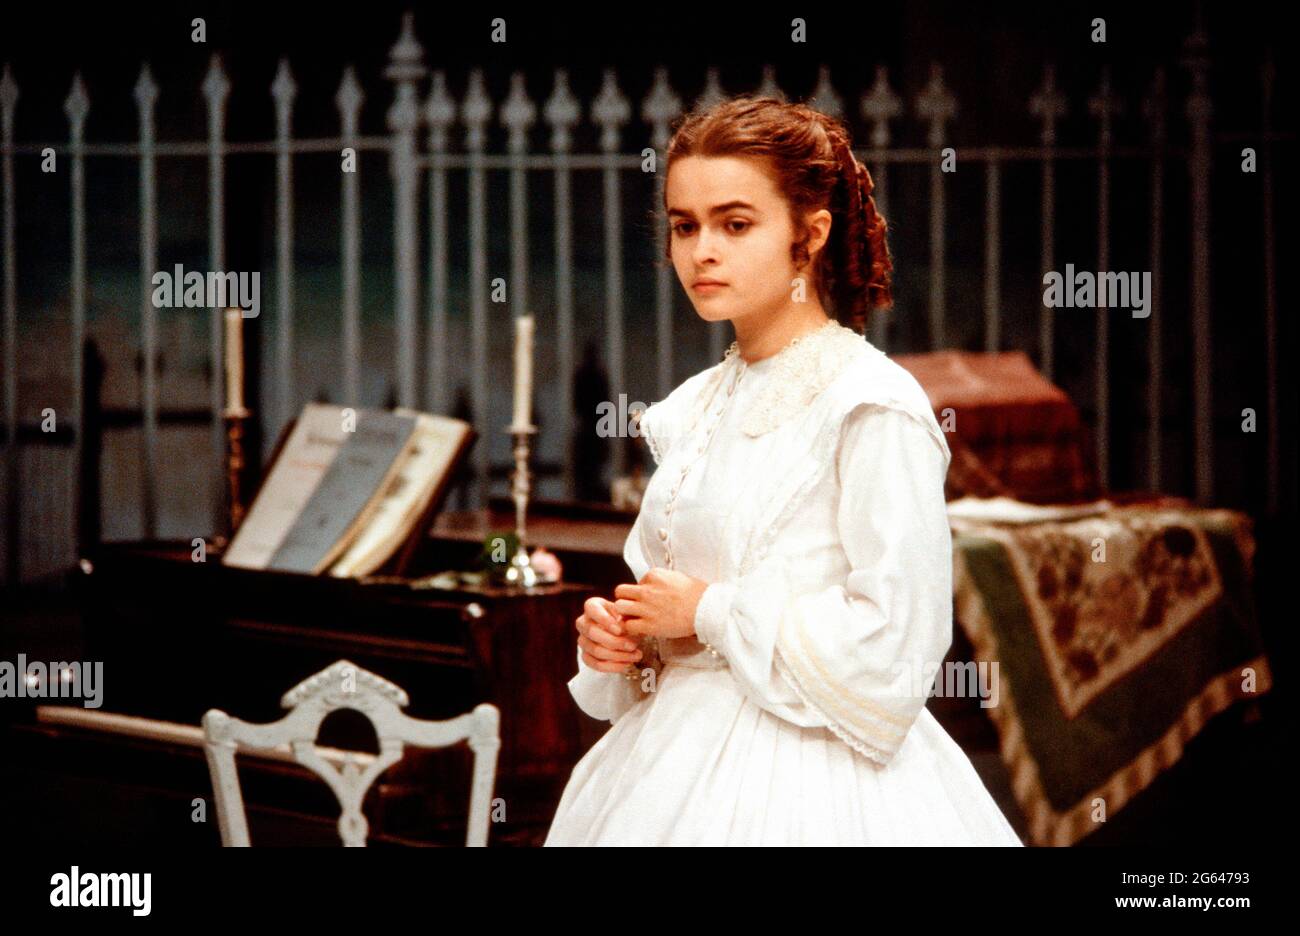 Helena Bonham-Carter (Anne Catherick / Laura Fairlie) in THE WOMAN IN WHITE by Melissa Murray at the Greenwich Theatre, London SE10  05/12/1988  based on the novel by Wilkie Collins  design: Alexandra Byrne  lighting: Mick Hughes  director: Sue Dunderdale Stock Photo